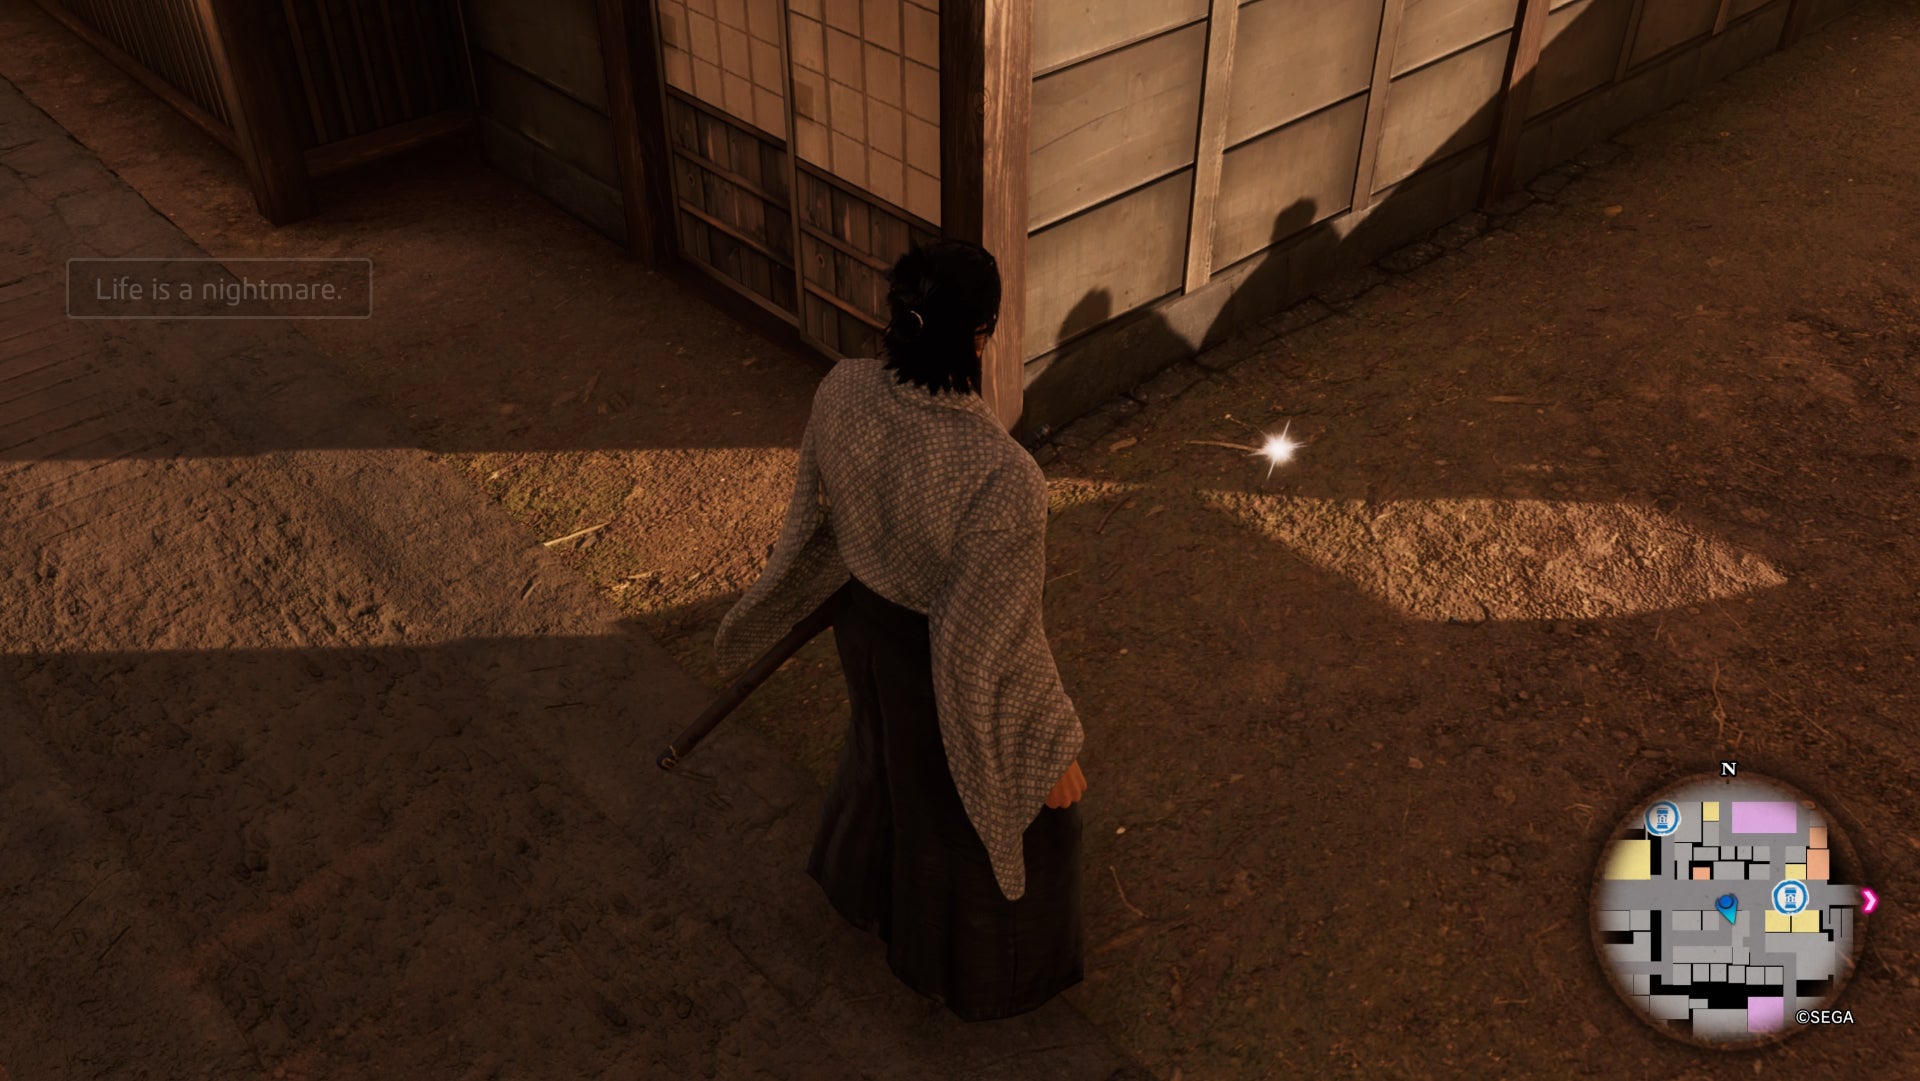 Like an Ishin dragon, Ryoma faces a luminous object on the ground